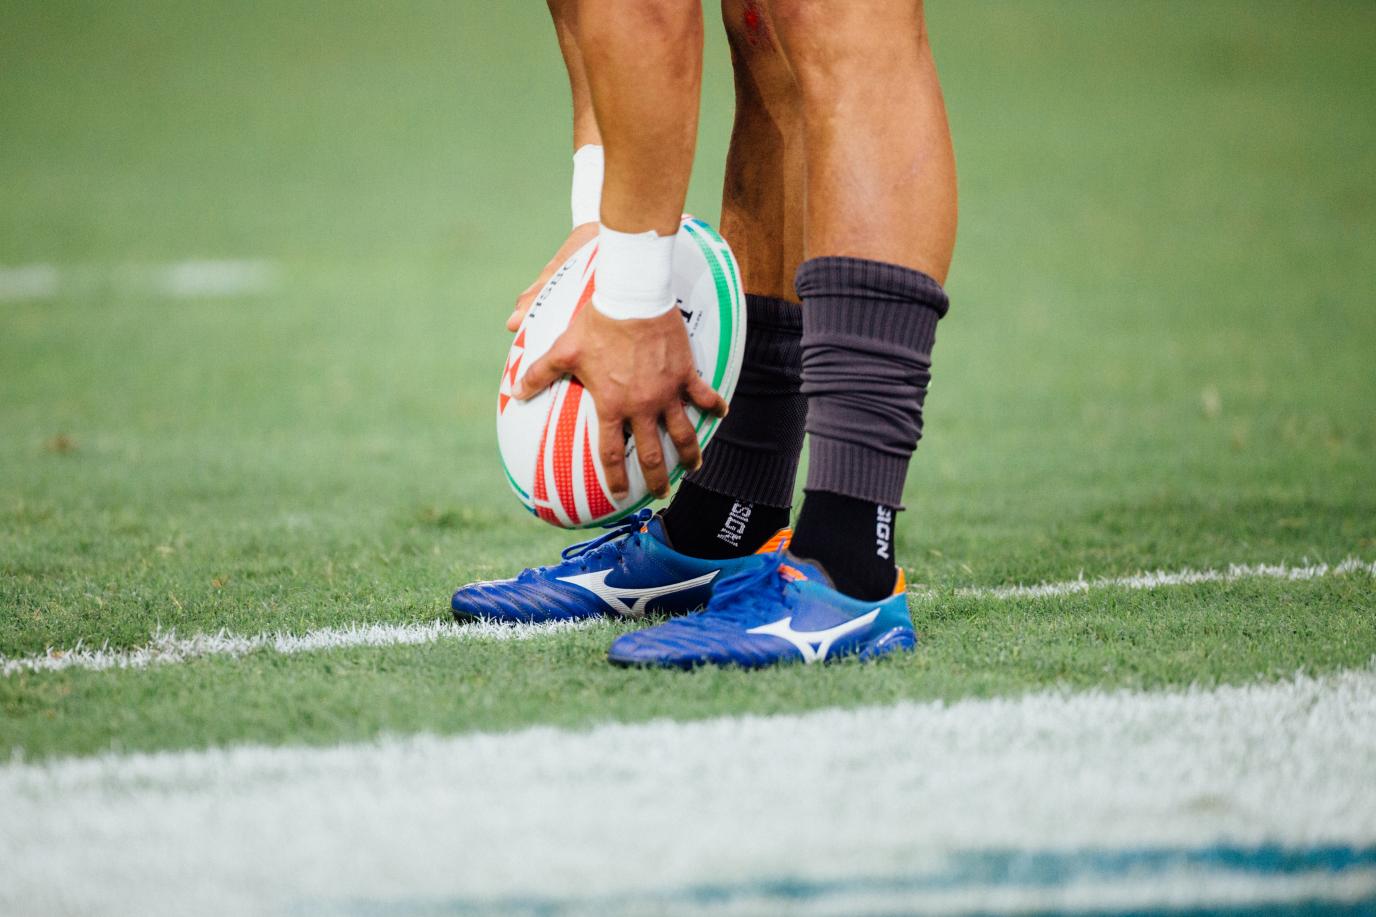 Rugby player placing ball on the ground